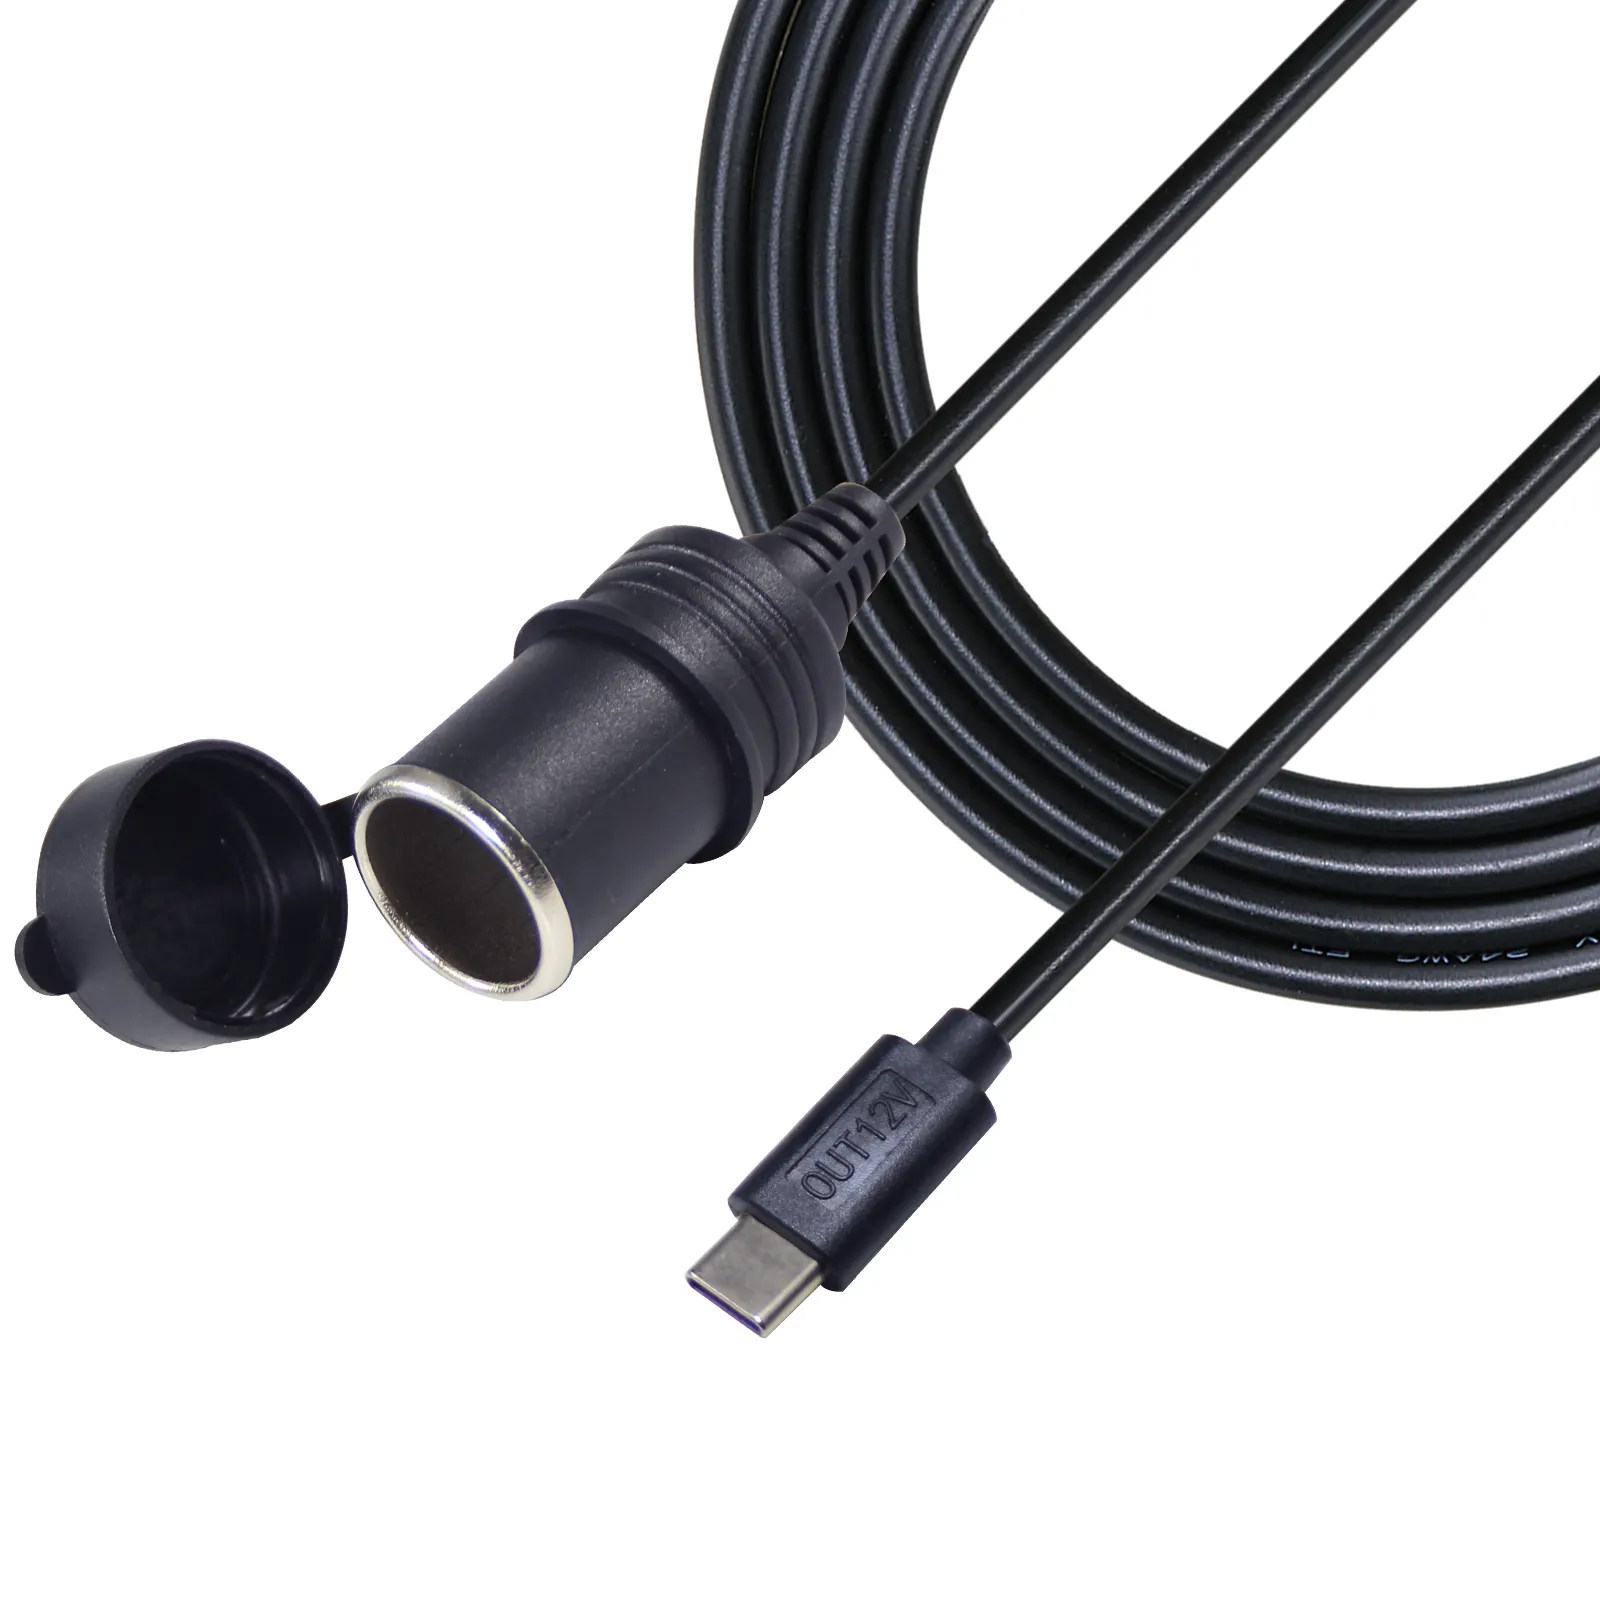 New Design Car Charger Cable For Vehicle Electrical Device Usb-Pd To Cigarette Lighter Adapter